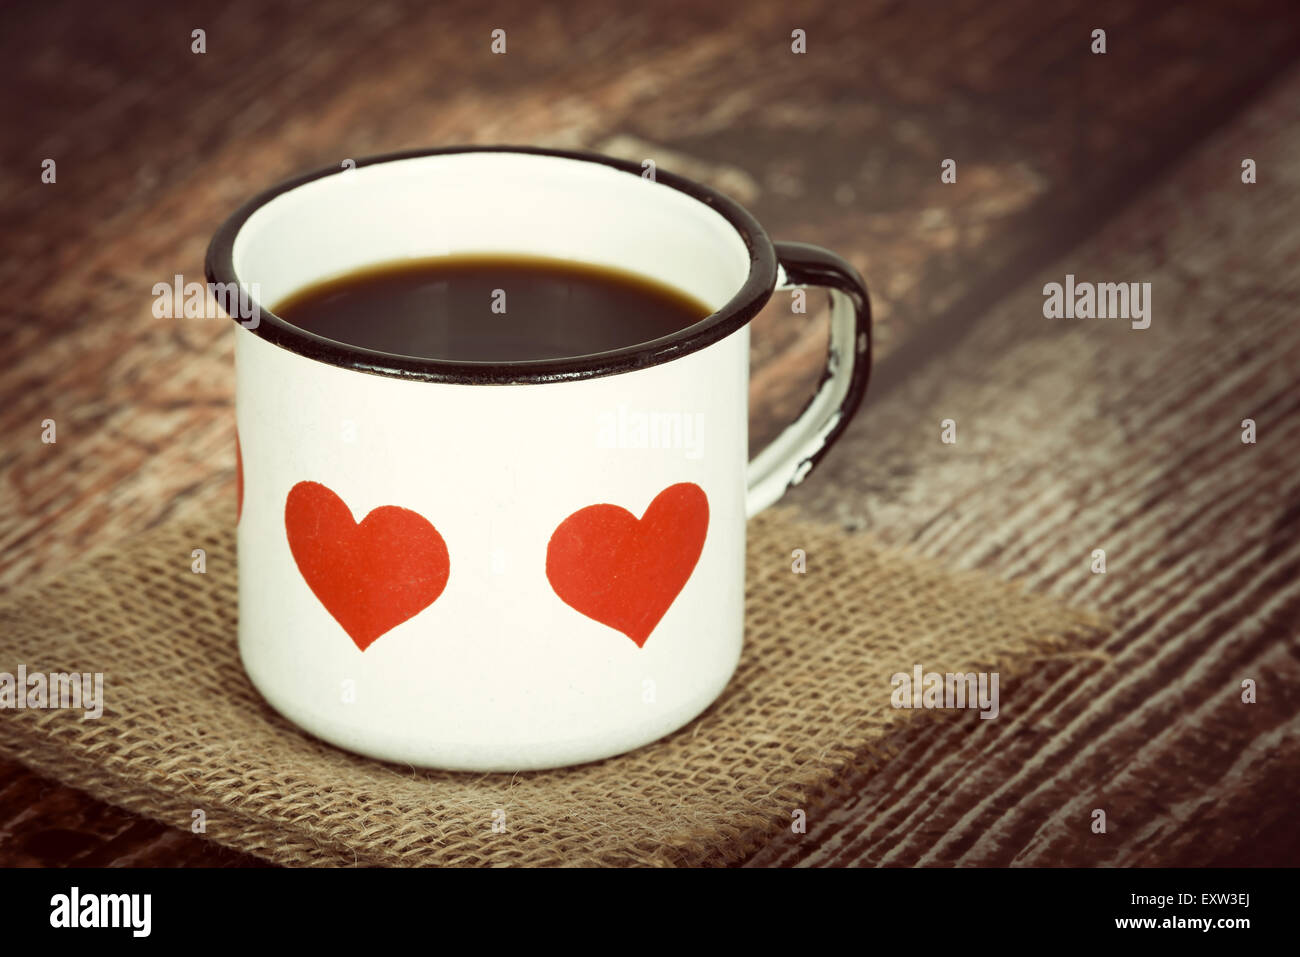 A cup of coffee in an old enamel mug with hearts against vintage background Stock Photo